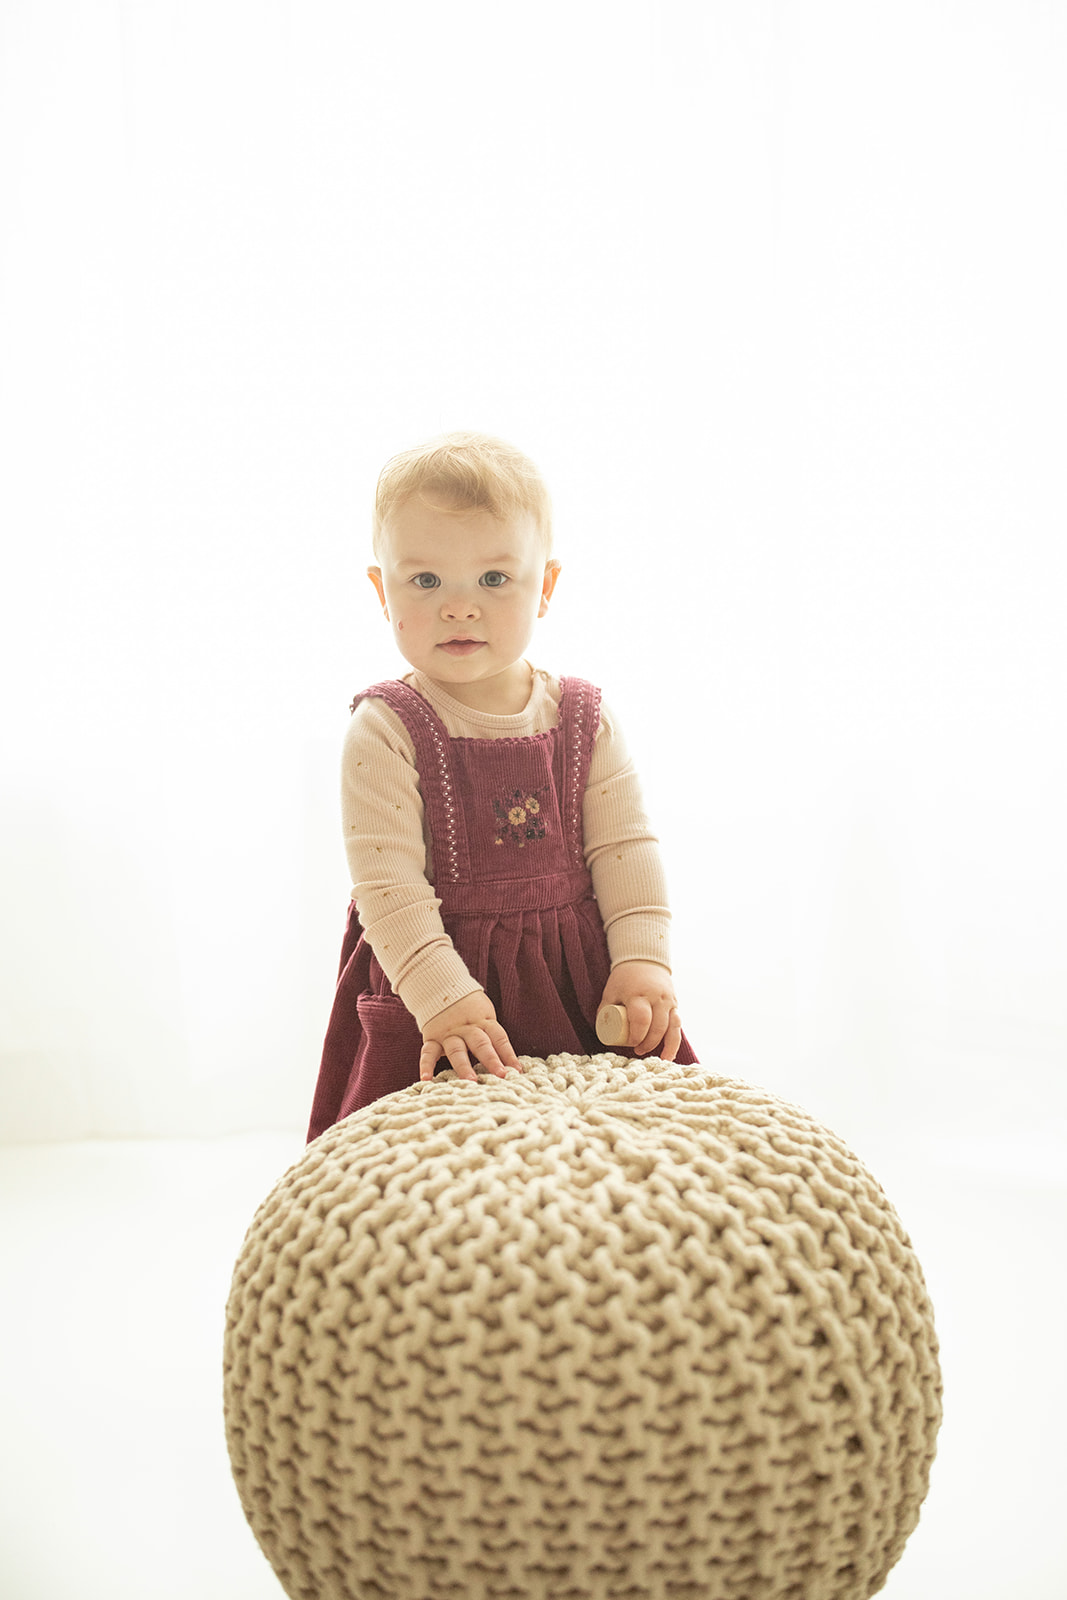 A young toddler stands in a purple dress in a studio with a woven ball